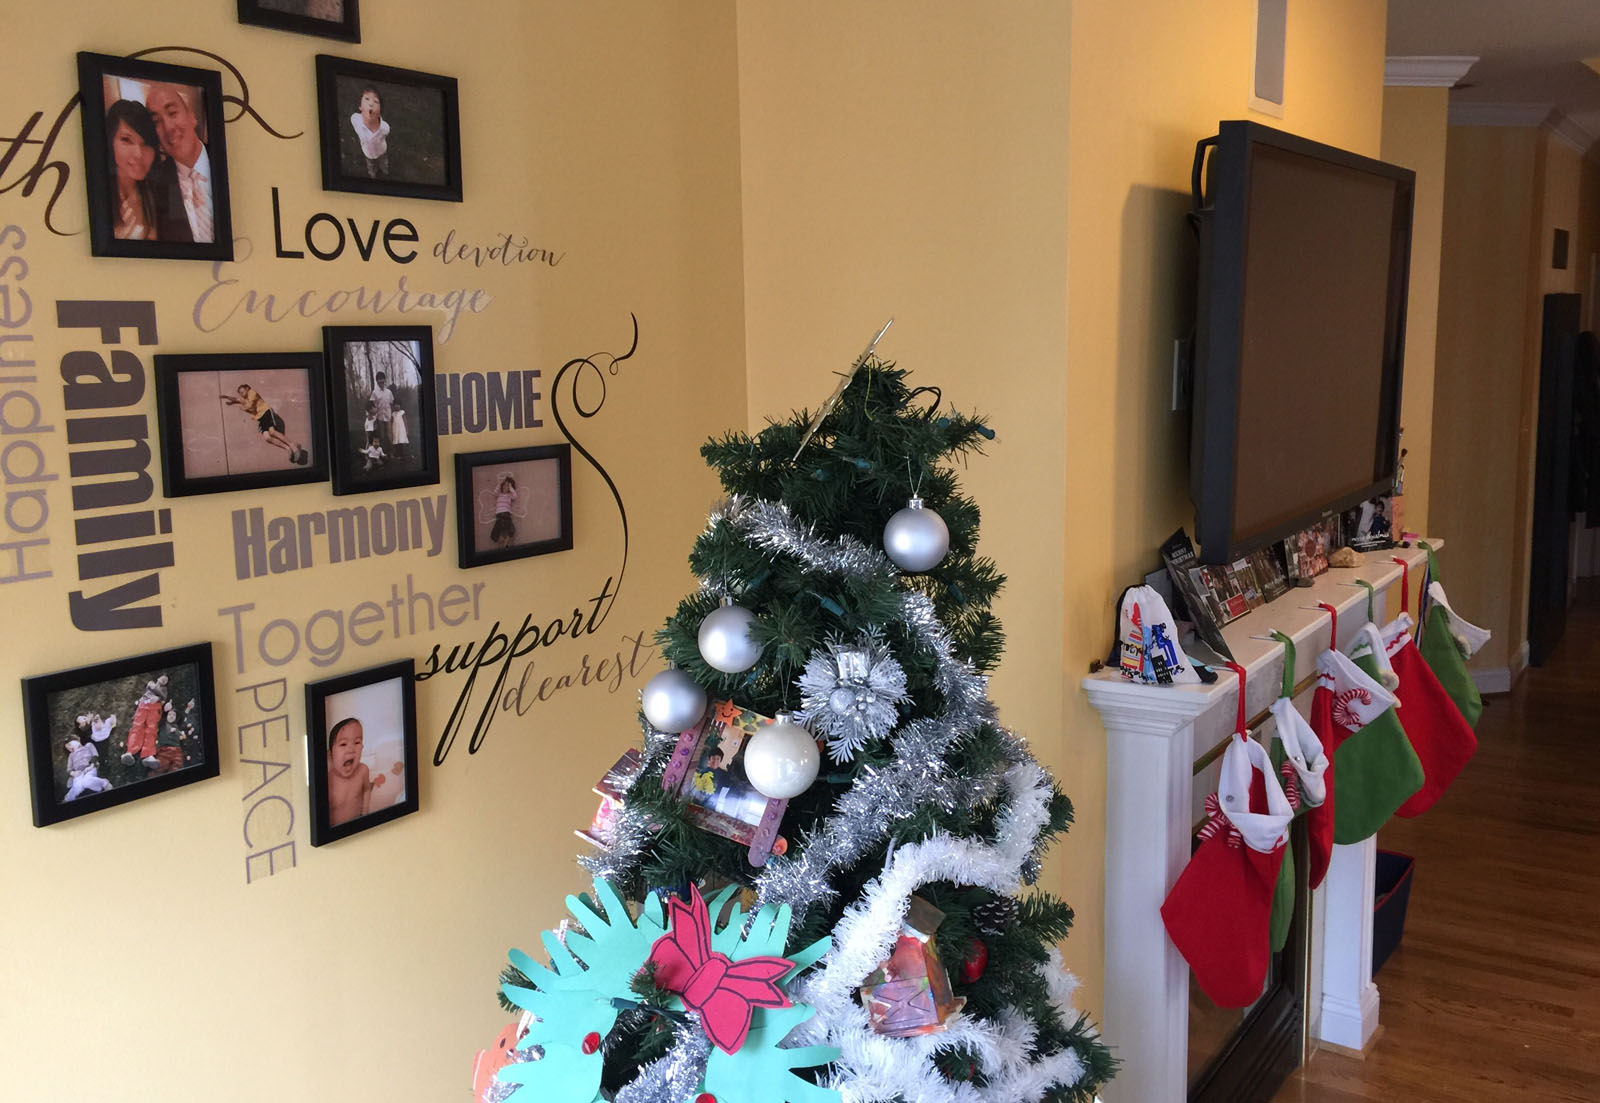 It's undetermined when the Goh family Christmas tree will come down this year. In 2016, when the tree was taken down at Easter, Samuel threatened to run away to find a family "that actually cares about Christmas," Goh said. Samuel wants the tree up all year in his bedroom. (WTOP/Kristi King)